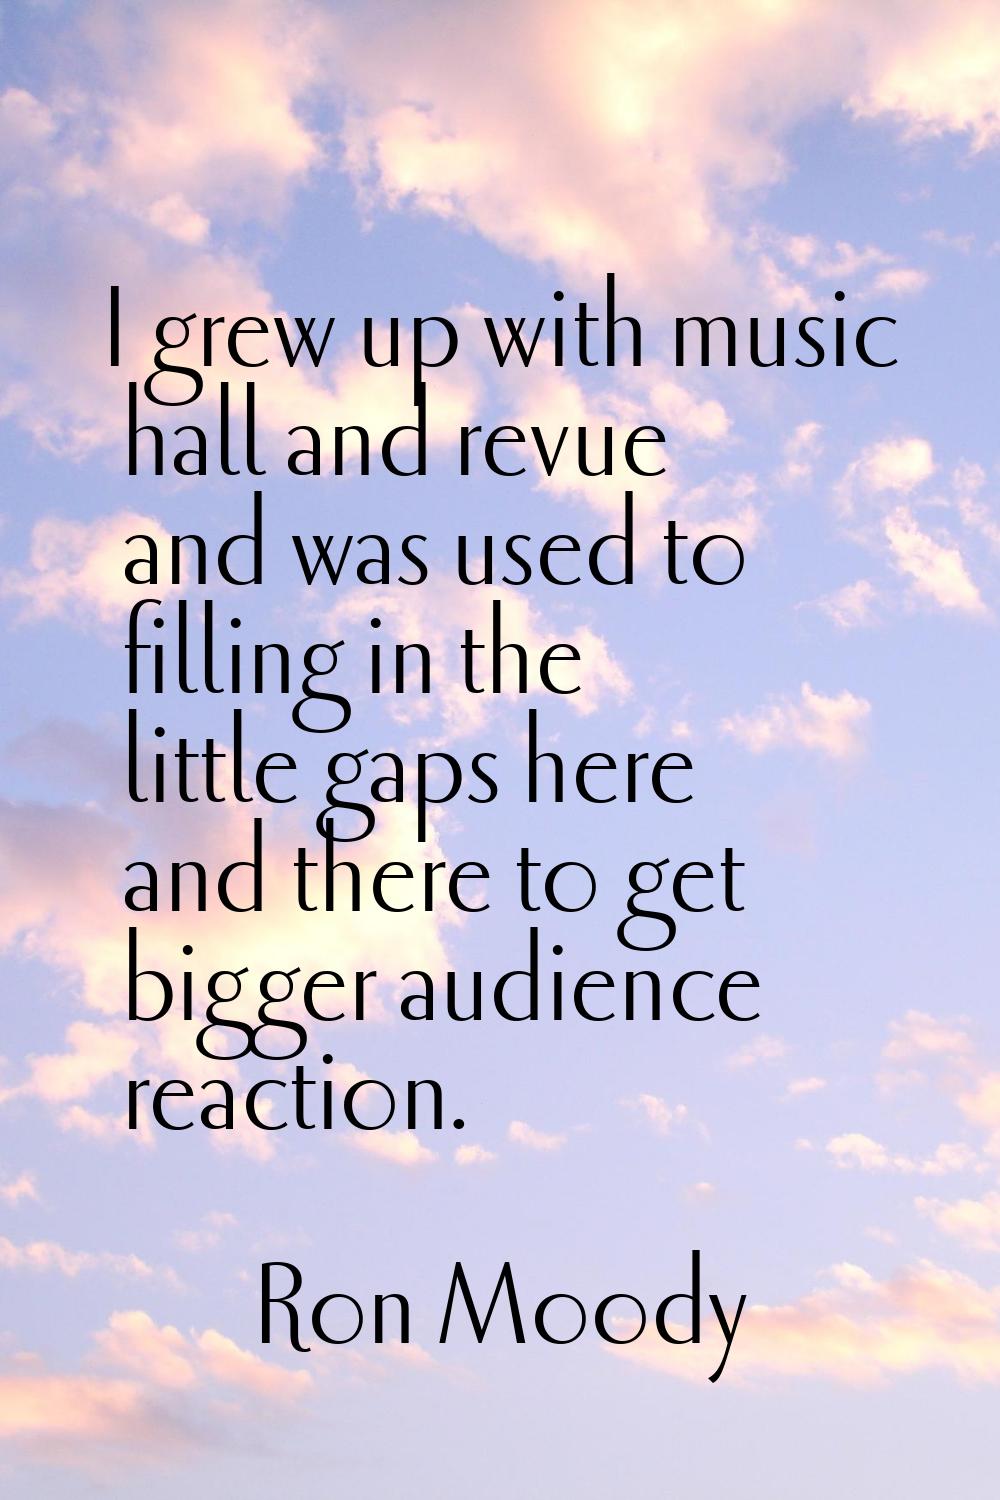 I grew up with music hall and revue and was used to filling in the little gaps here and there to ge